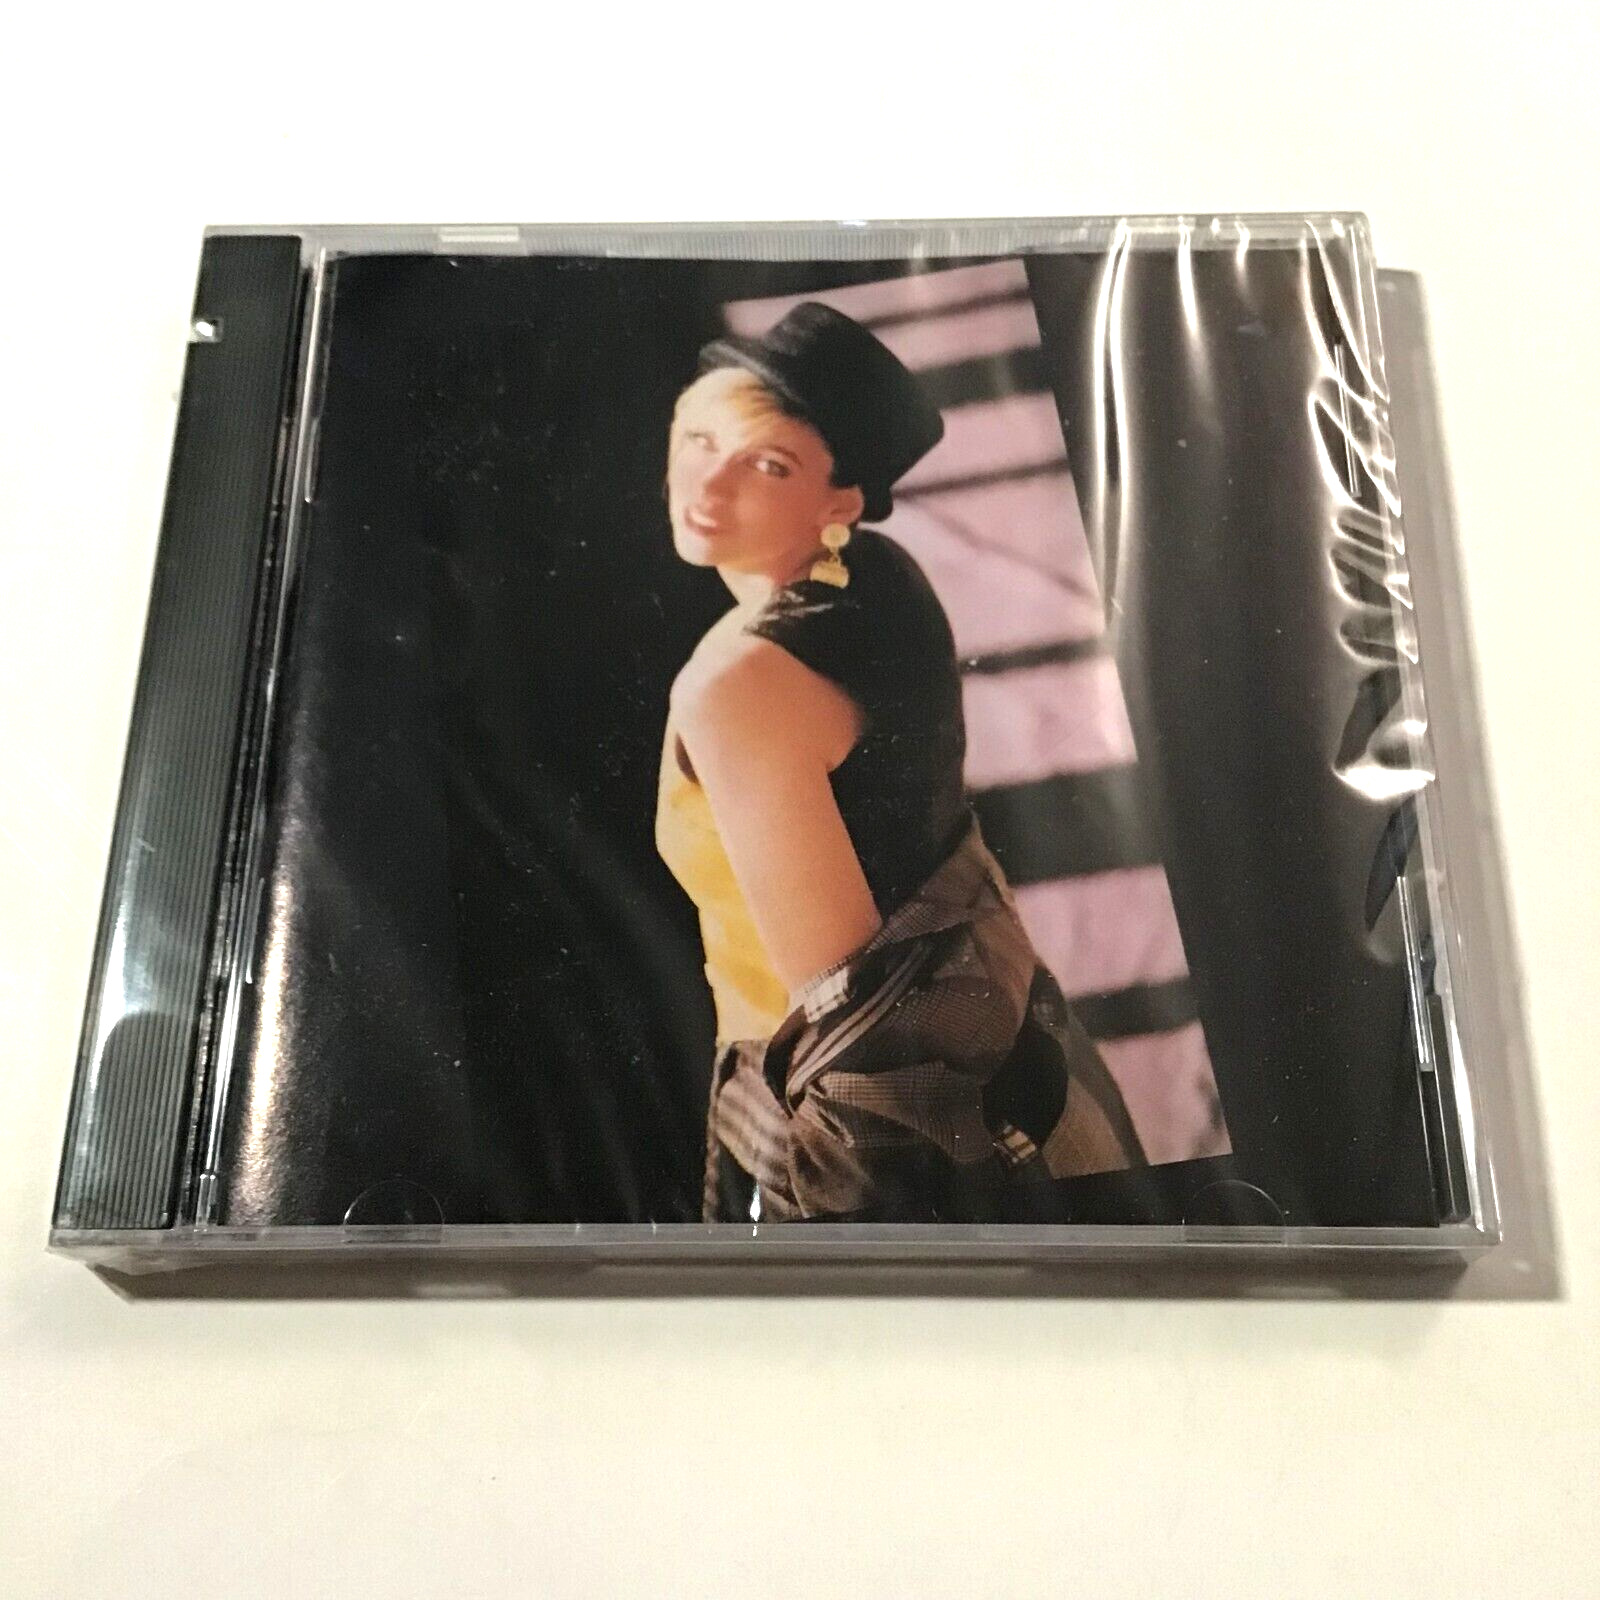 Debbie Gibson - Anything Is Possible (CD, 1990) Pop, Sealed Promo Cut in Spine